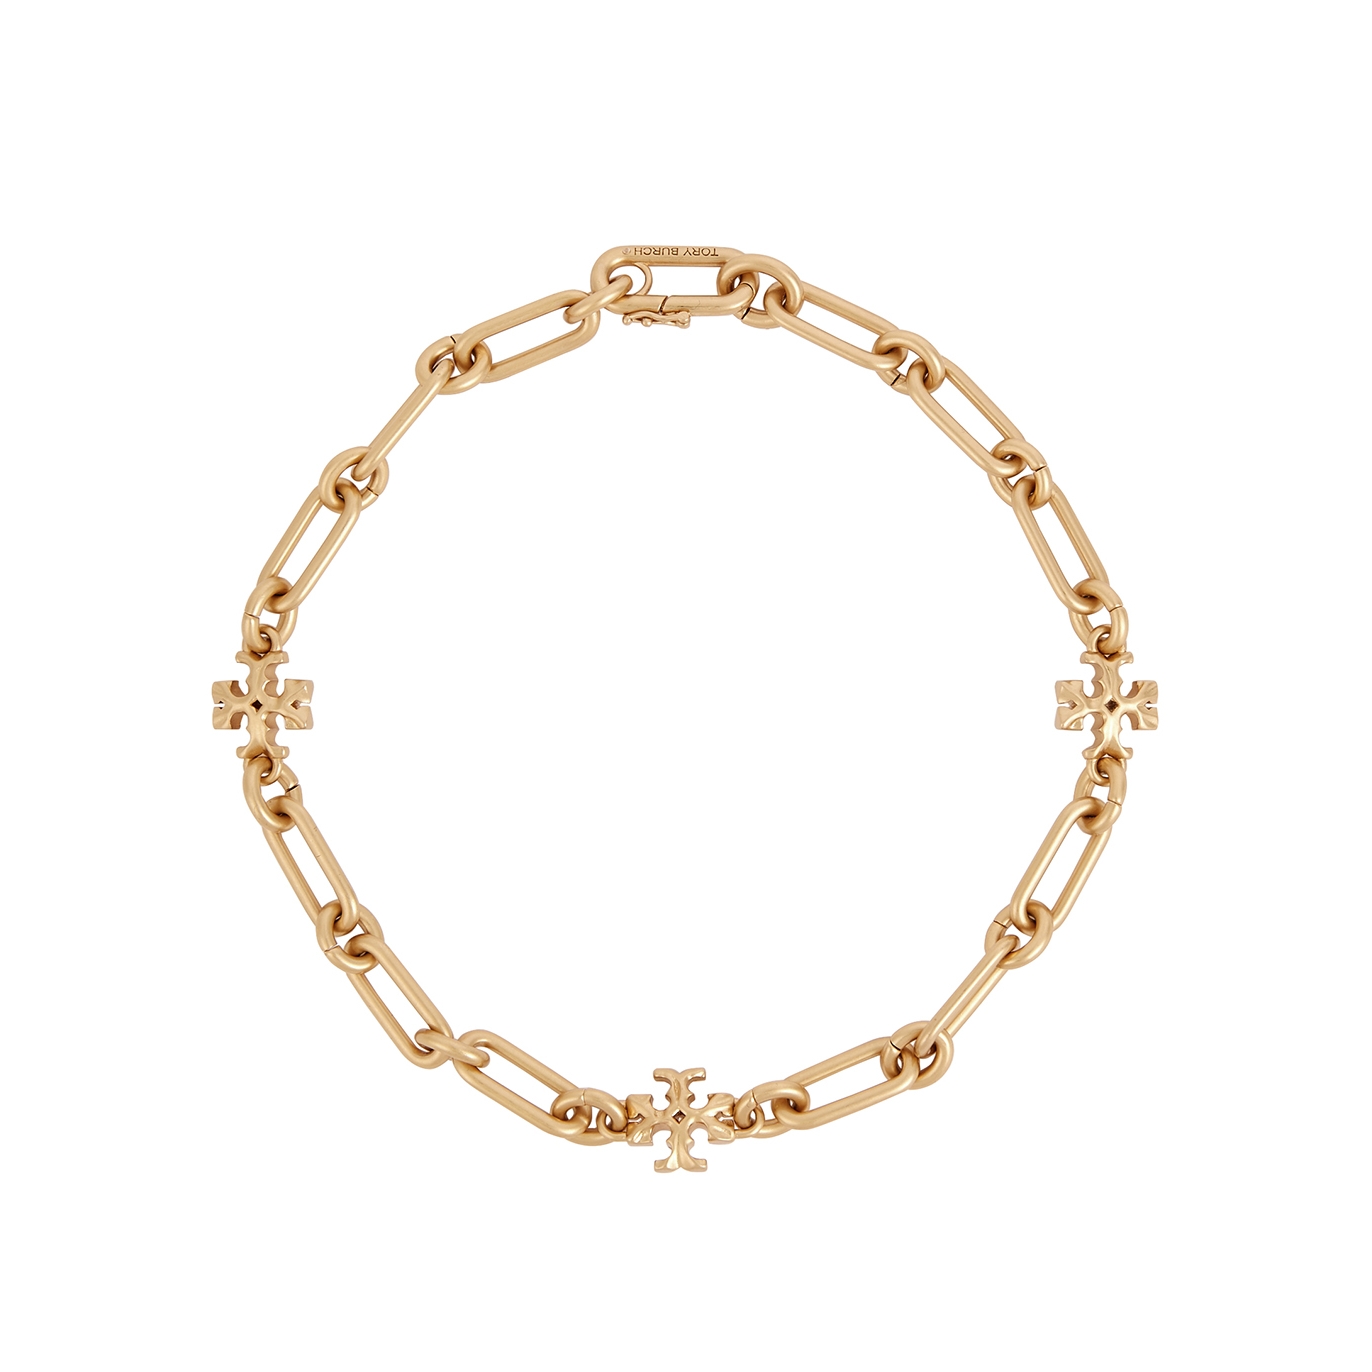 Tory Burch Roxanne Chain Necklace - Gold - One Size